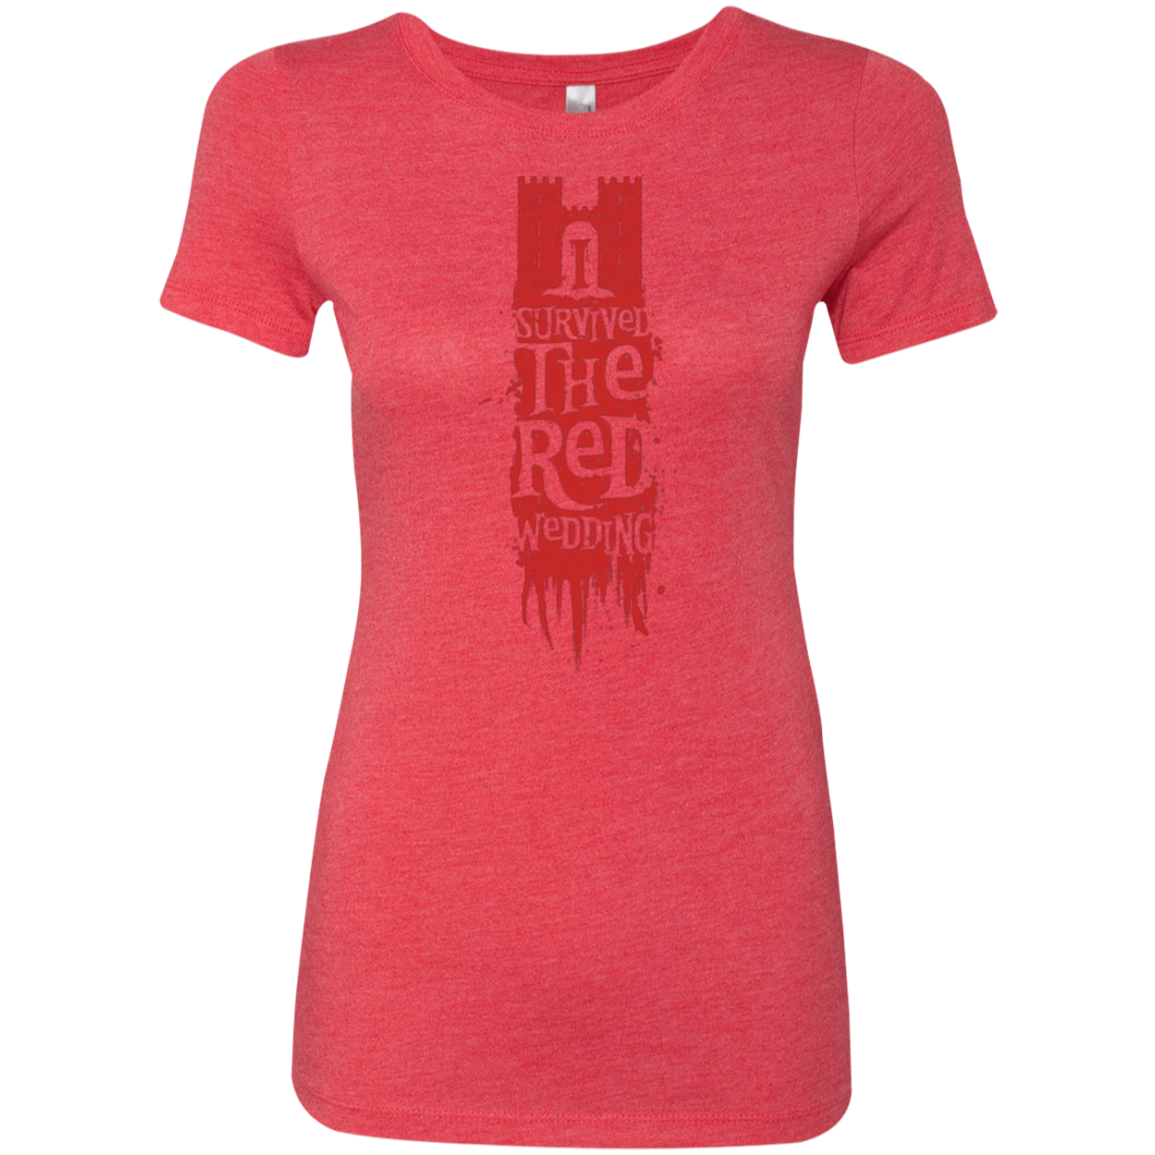 I Survived the Red Wedding Women's Triblend T-Shirt